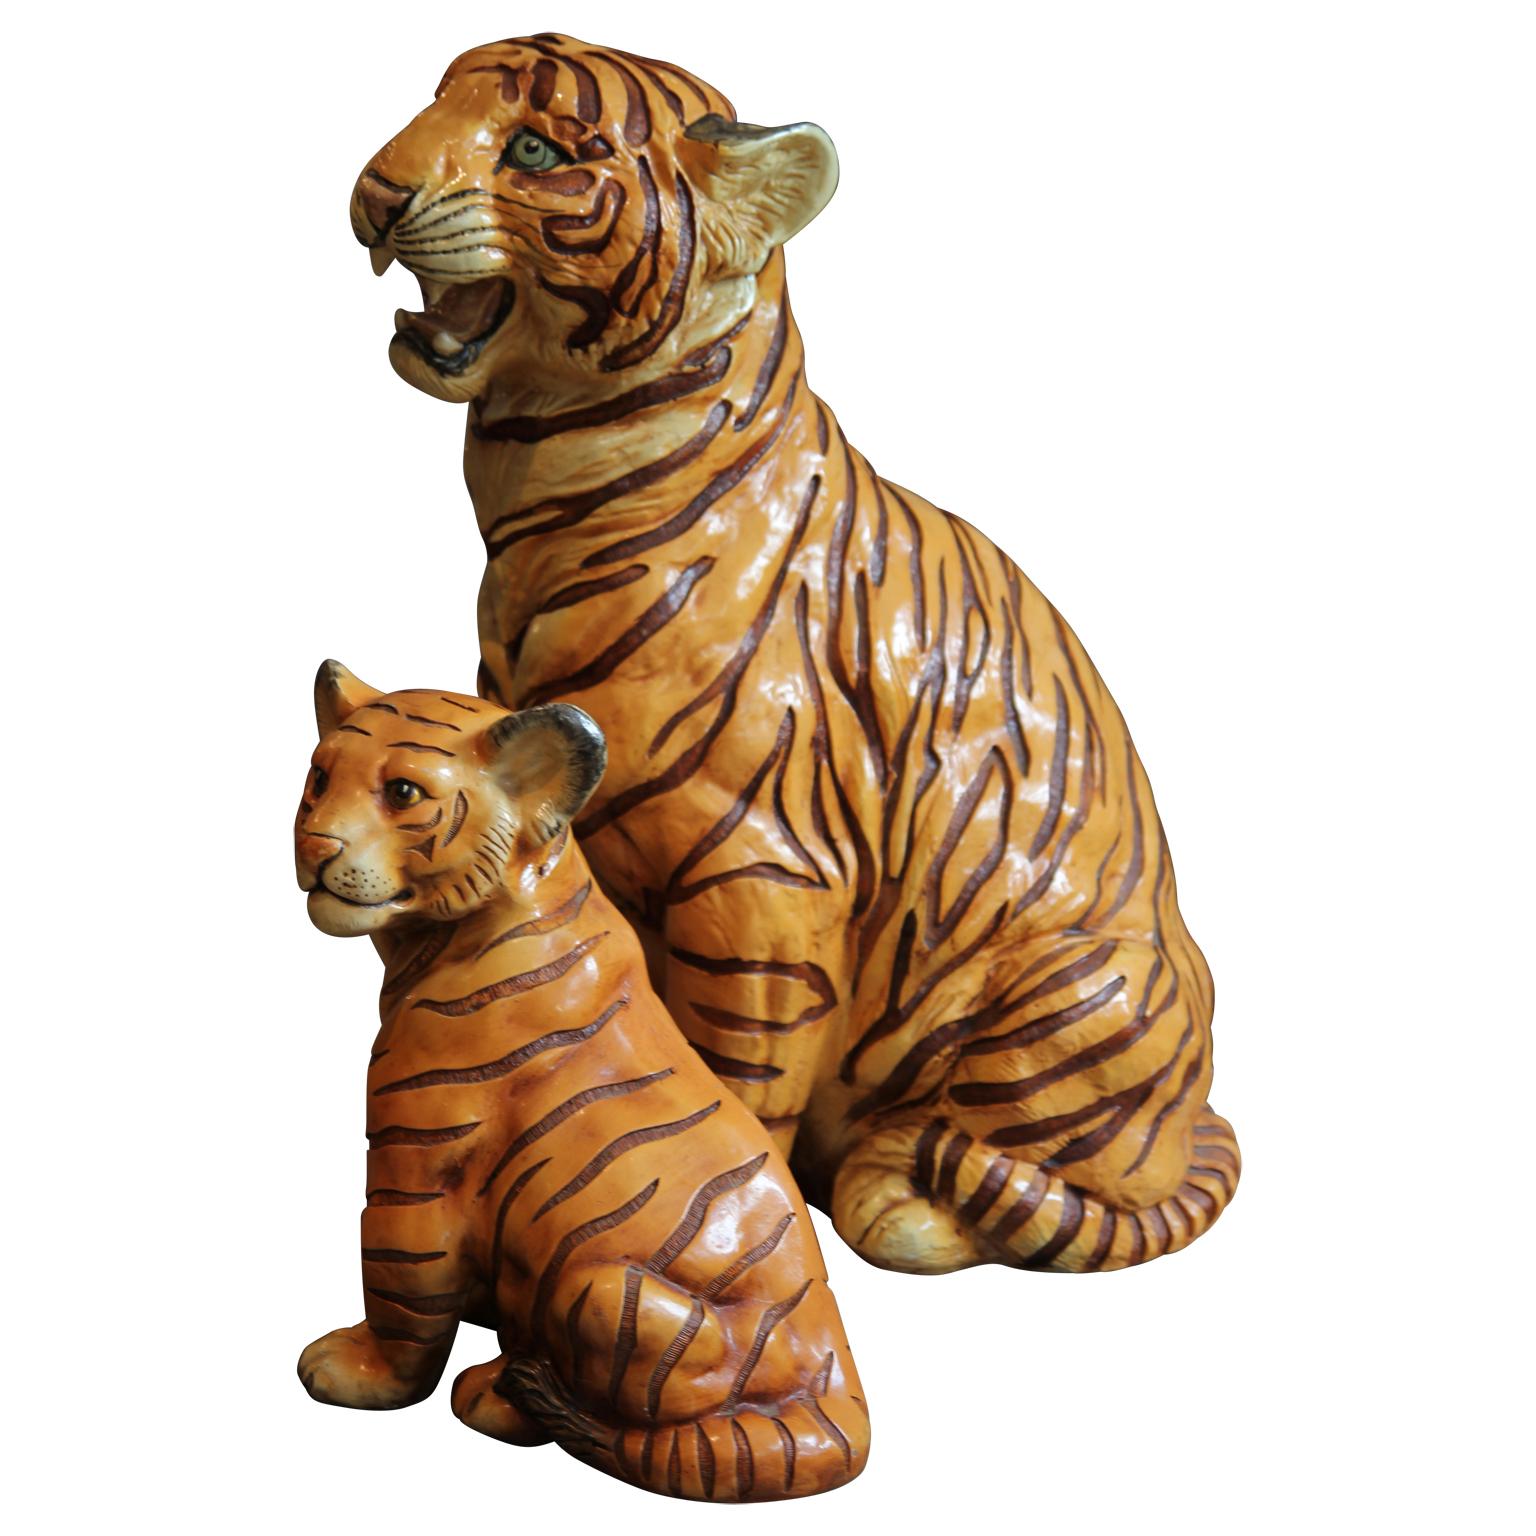 Majestic porcelain tiger sculpture. The stripes were individually sculpted and the tiger is hand painted with great detail. 

